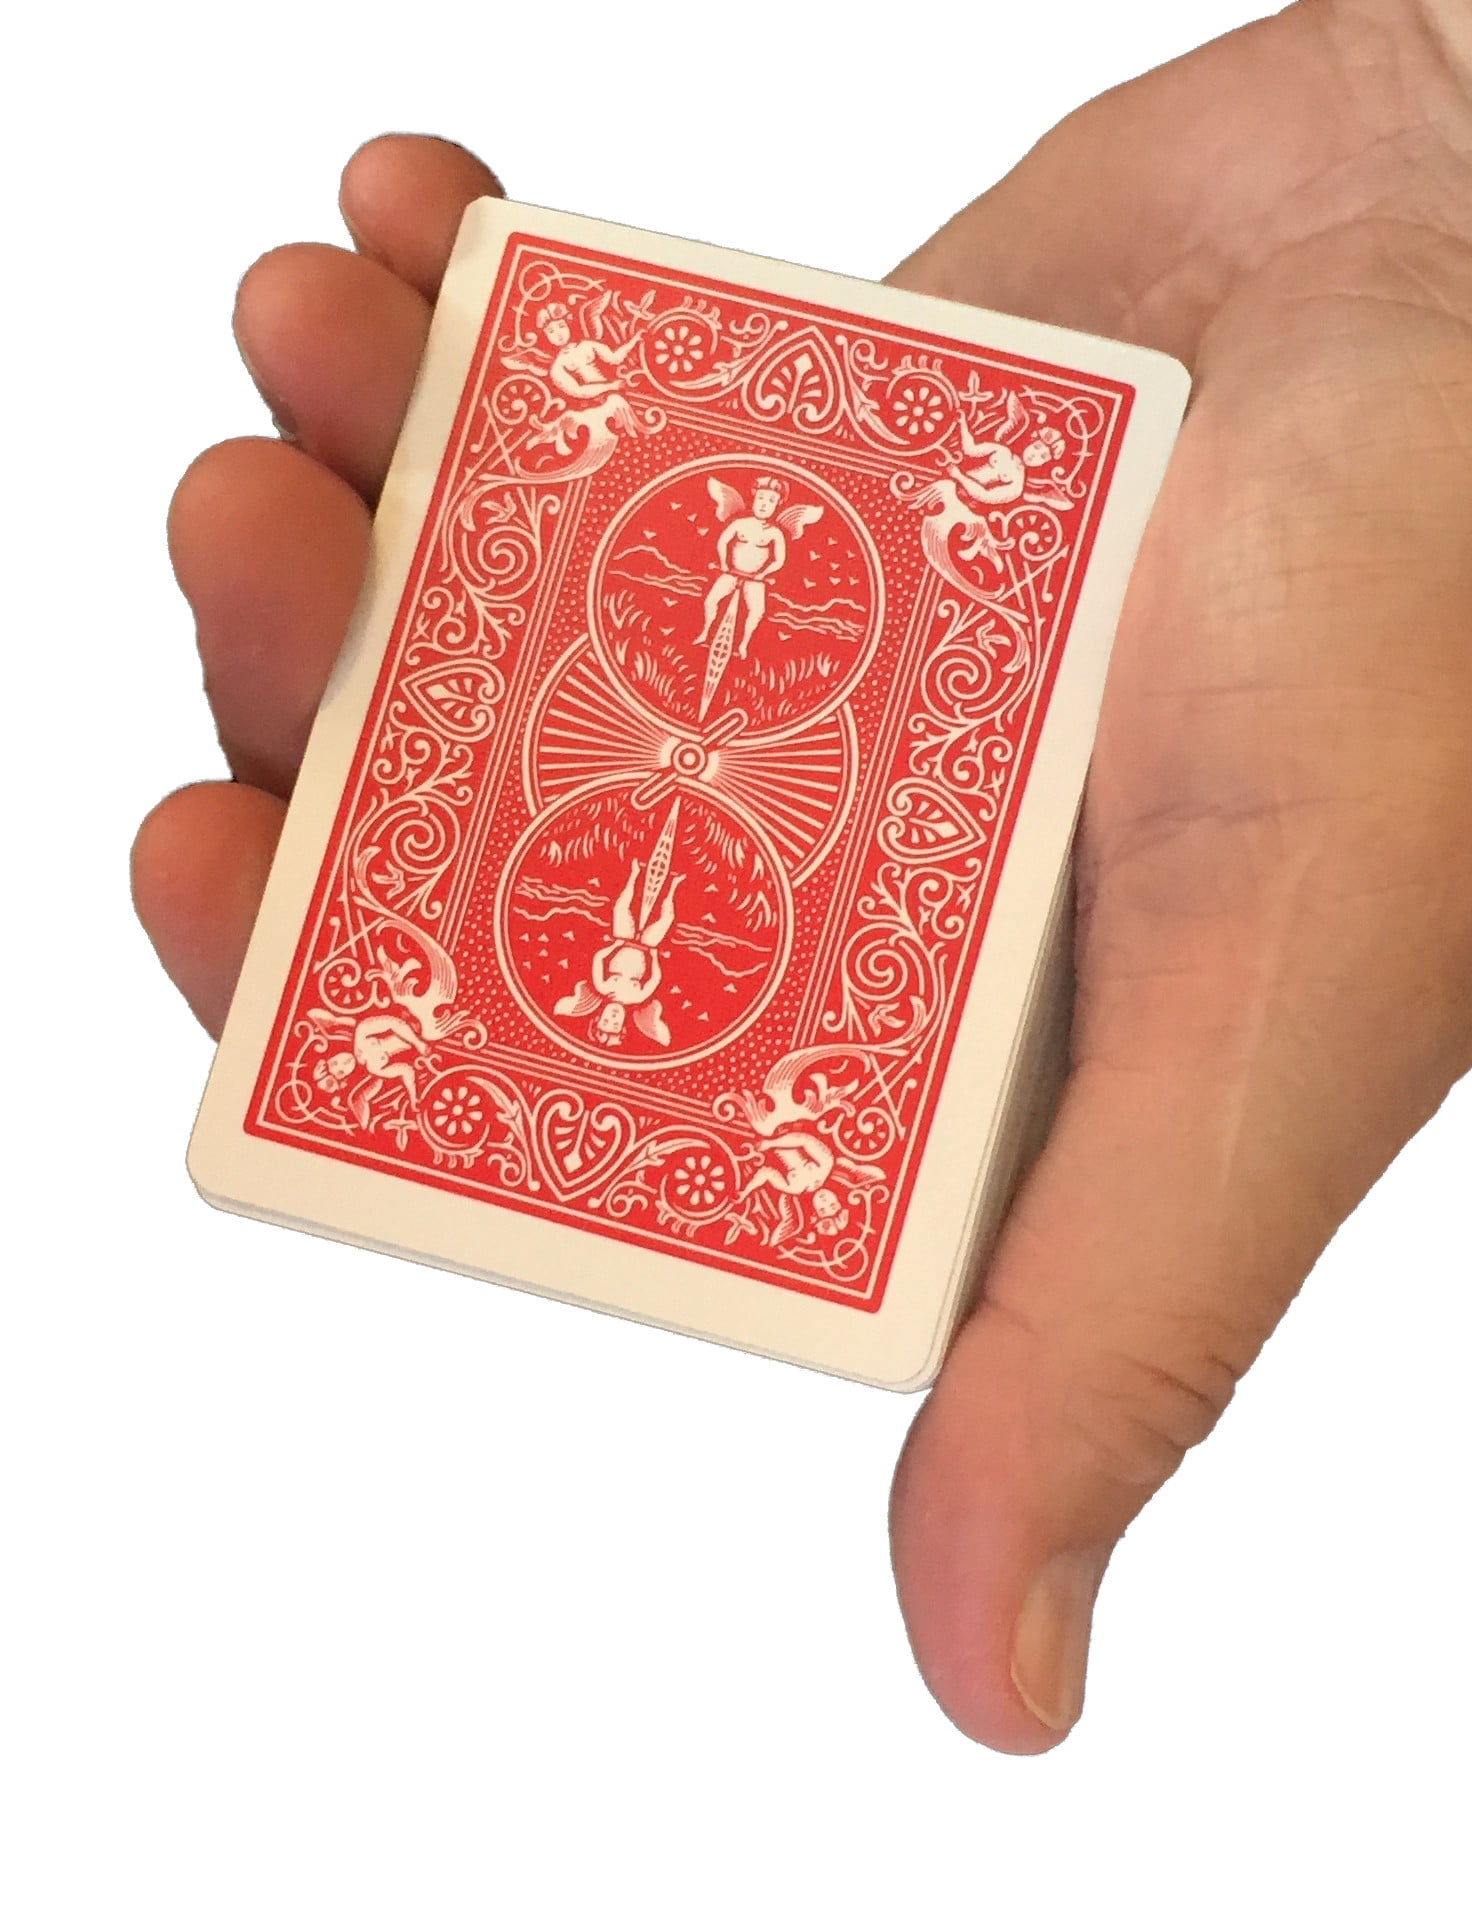 Details about   One Way Forcing Deck for Magic Tricks Red  7 of Spades 